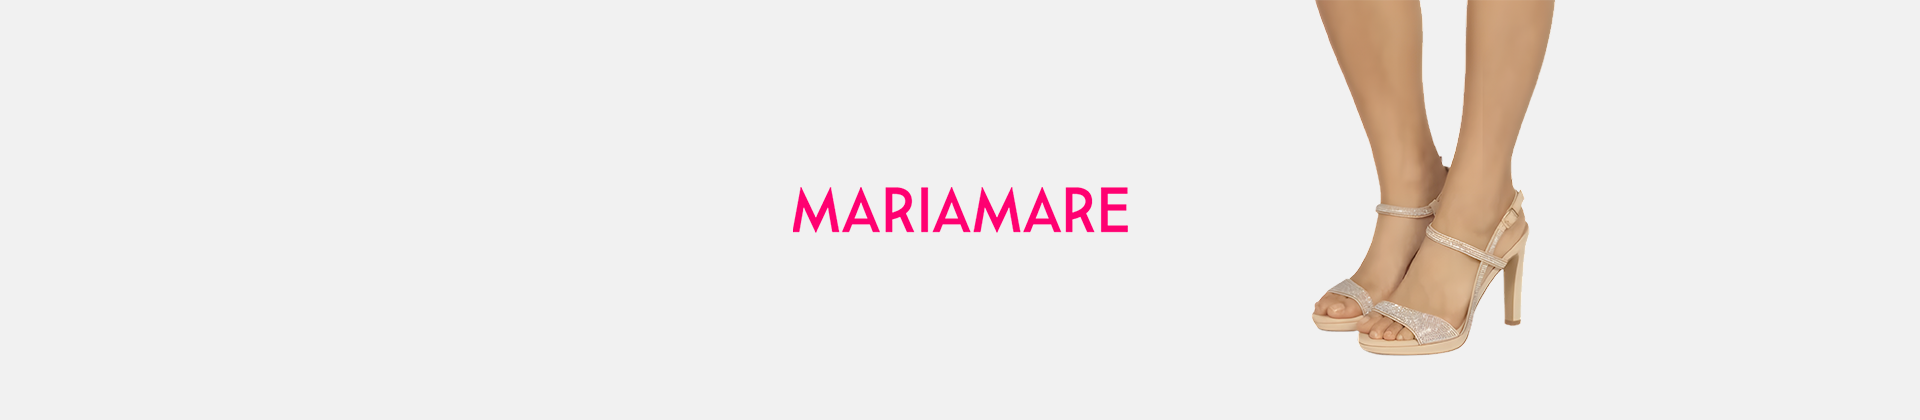 Maria Mare women shoes on line